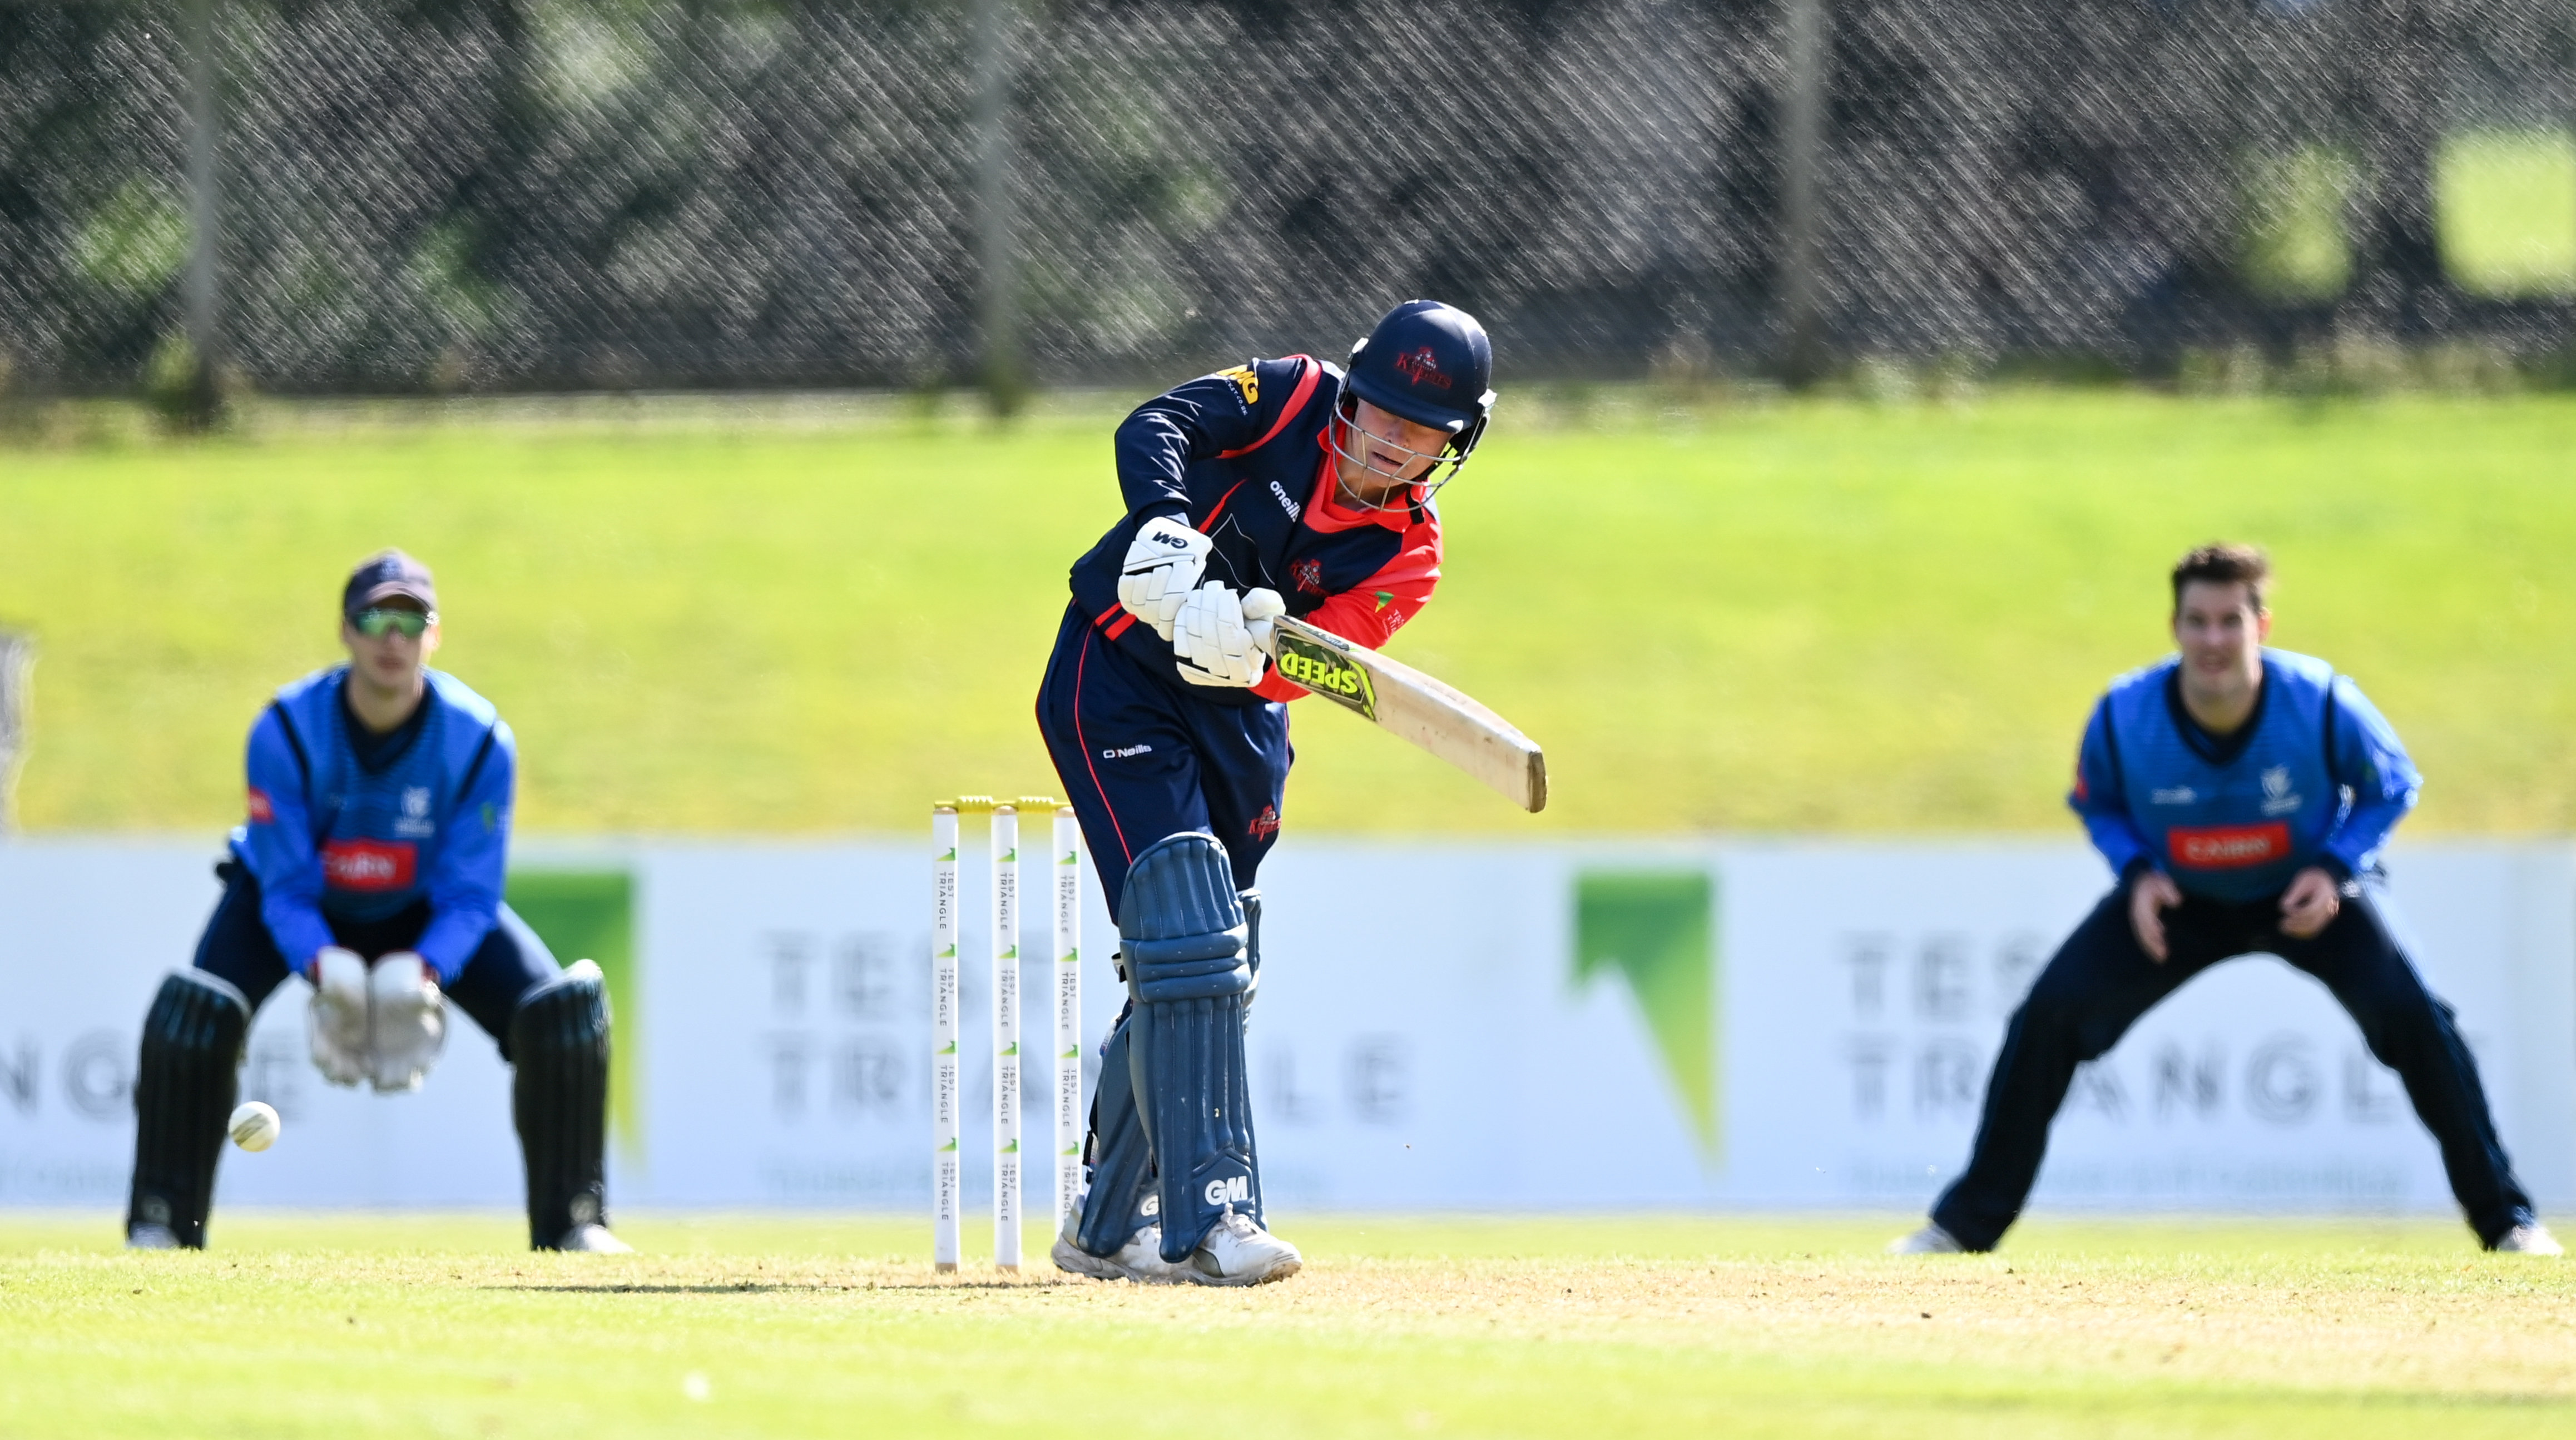 Cricket Ireland: PJ Moor joins Munster Reds squad, Neil Rock moves to Northern Knights